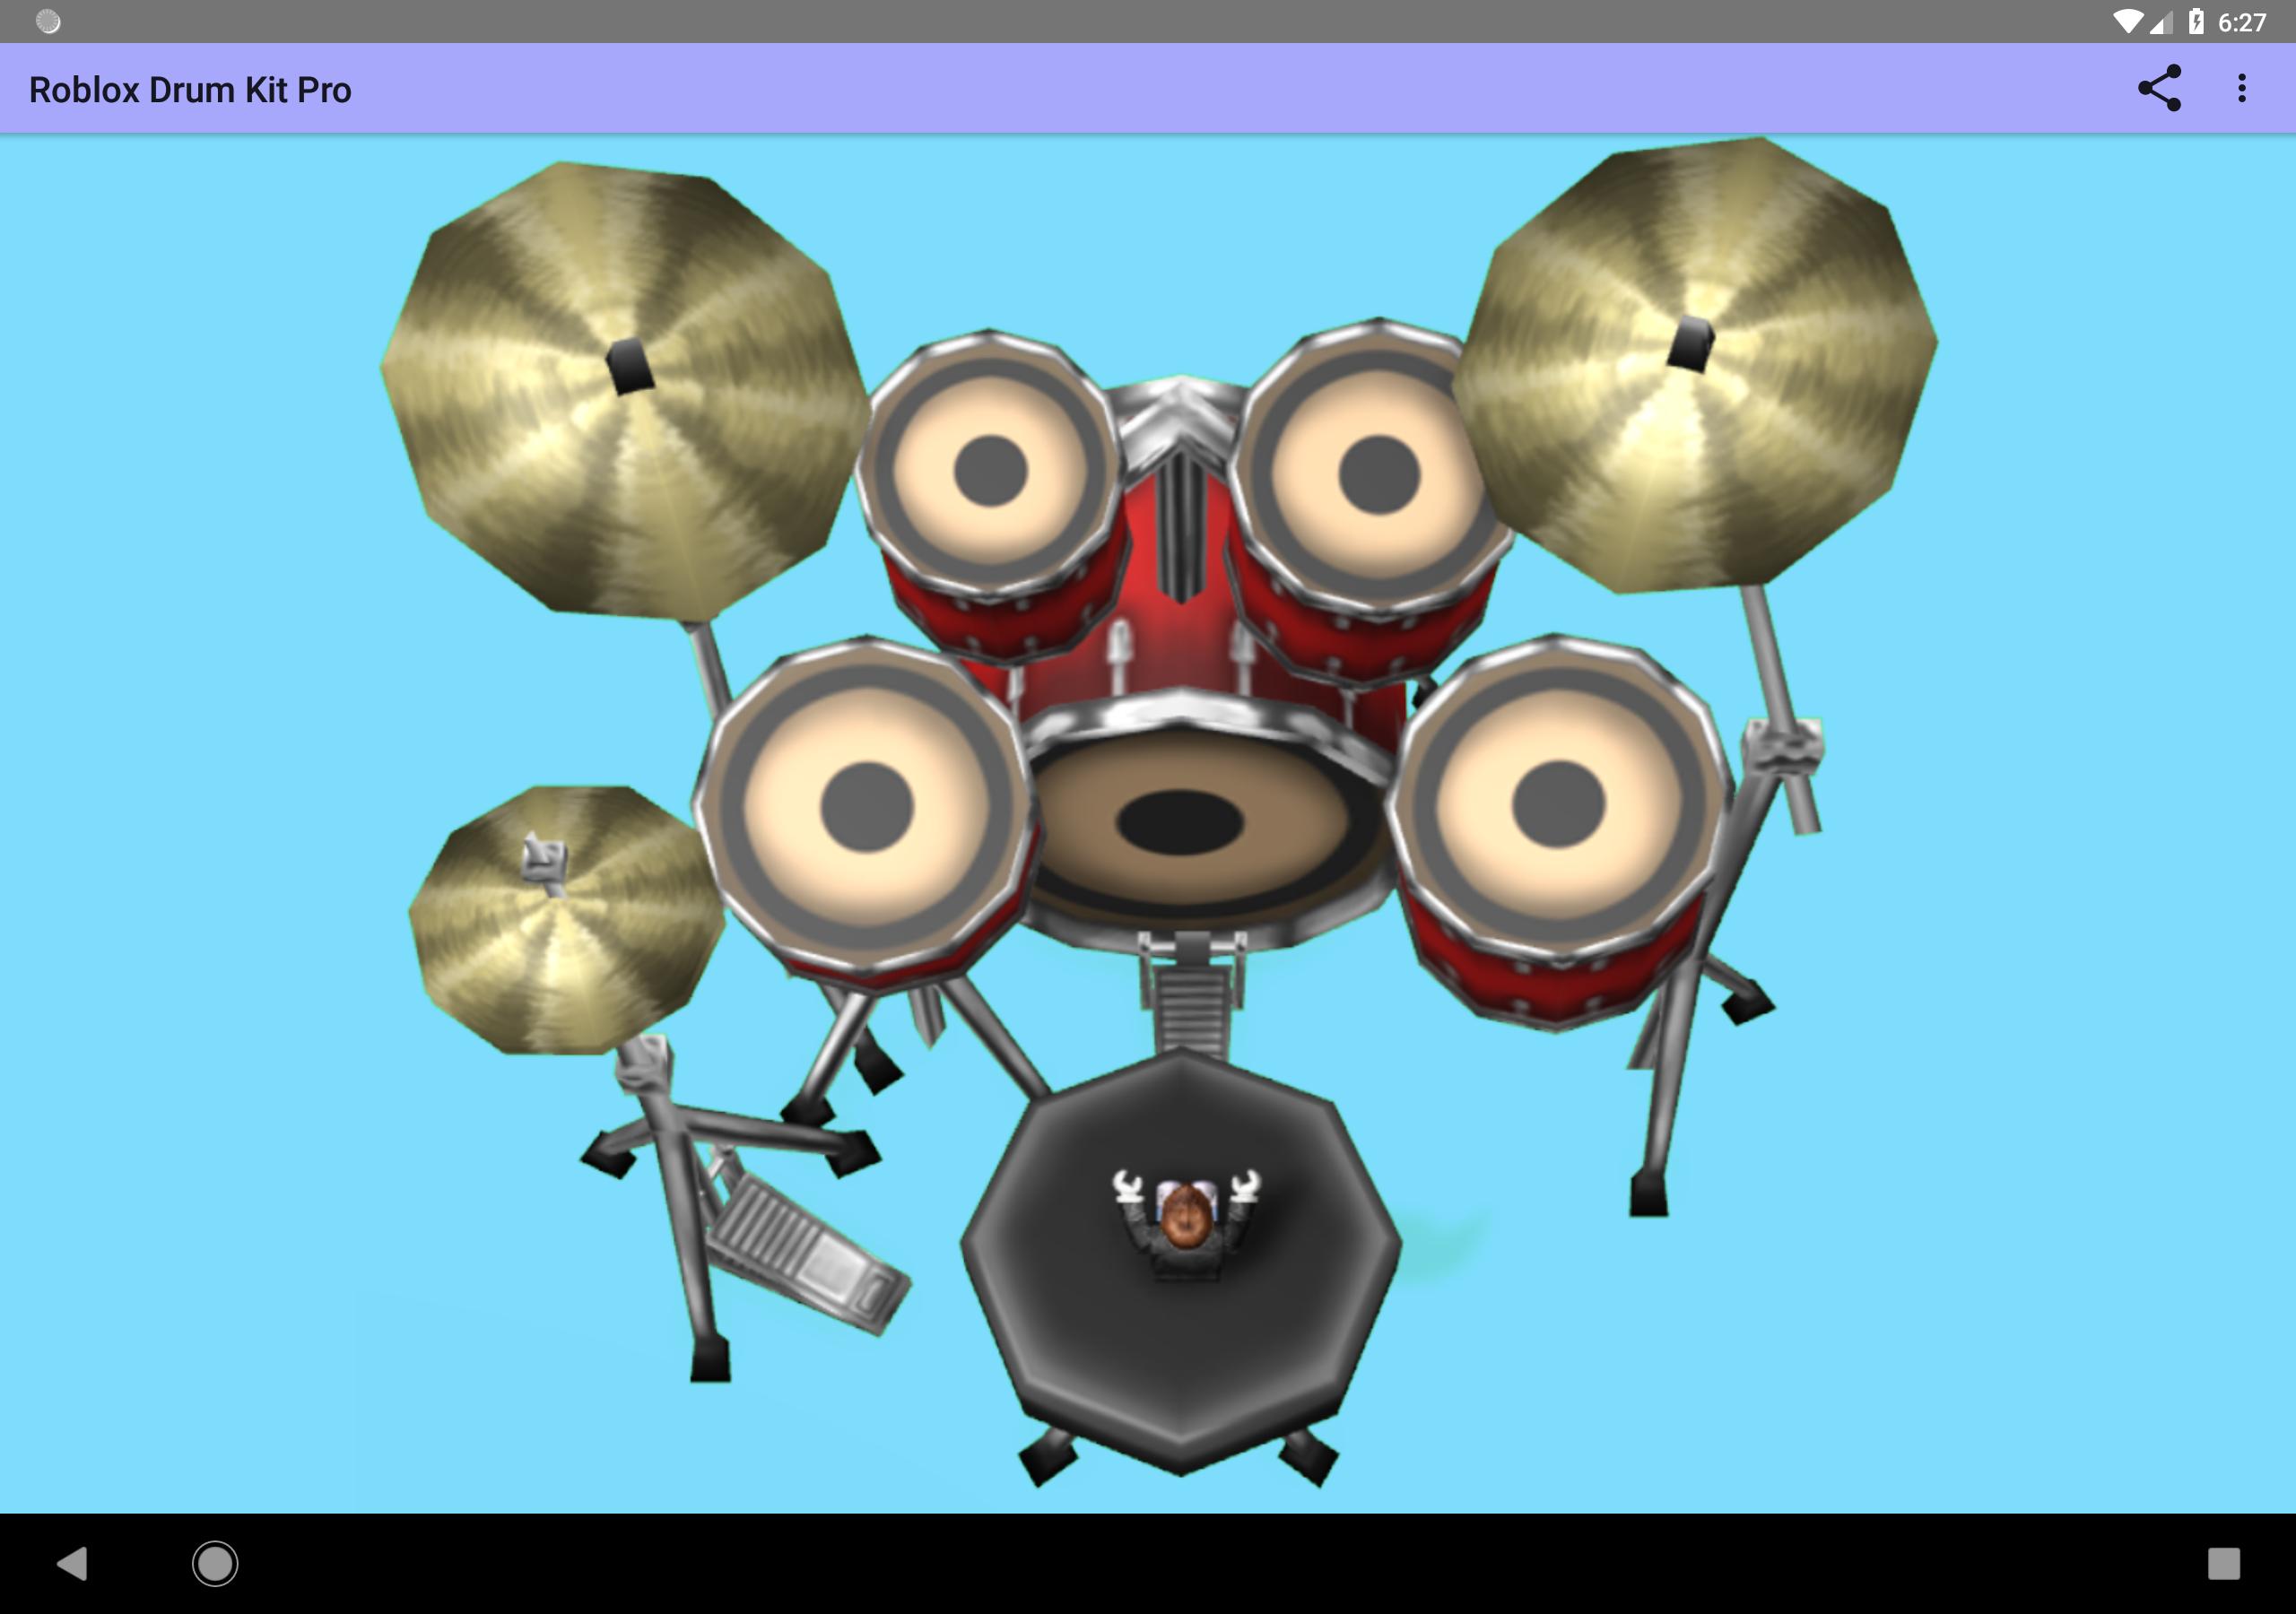 Pro Roblox Oof Drum Kit Death Sound Meme Drums For Android Apk Download - die with oof roblox